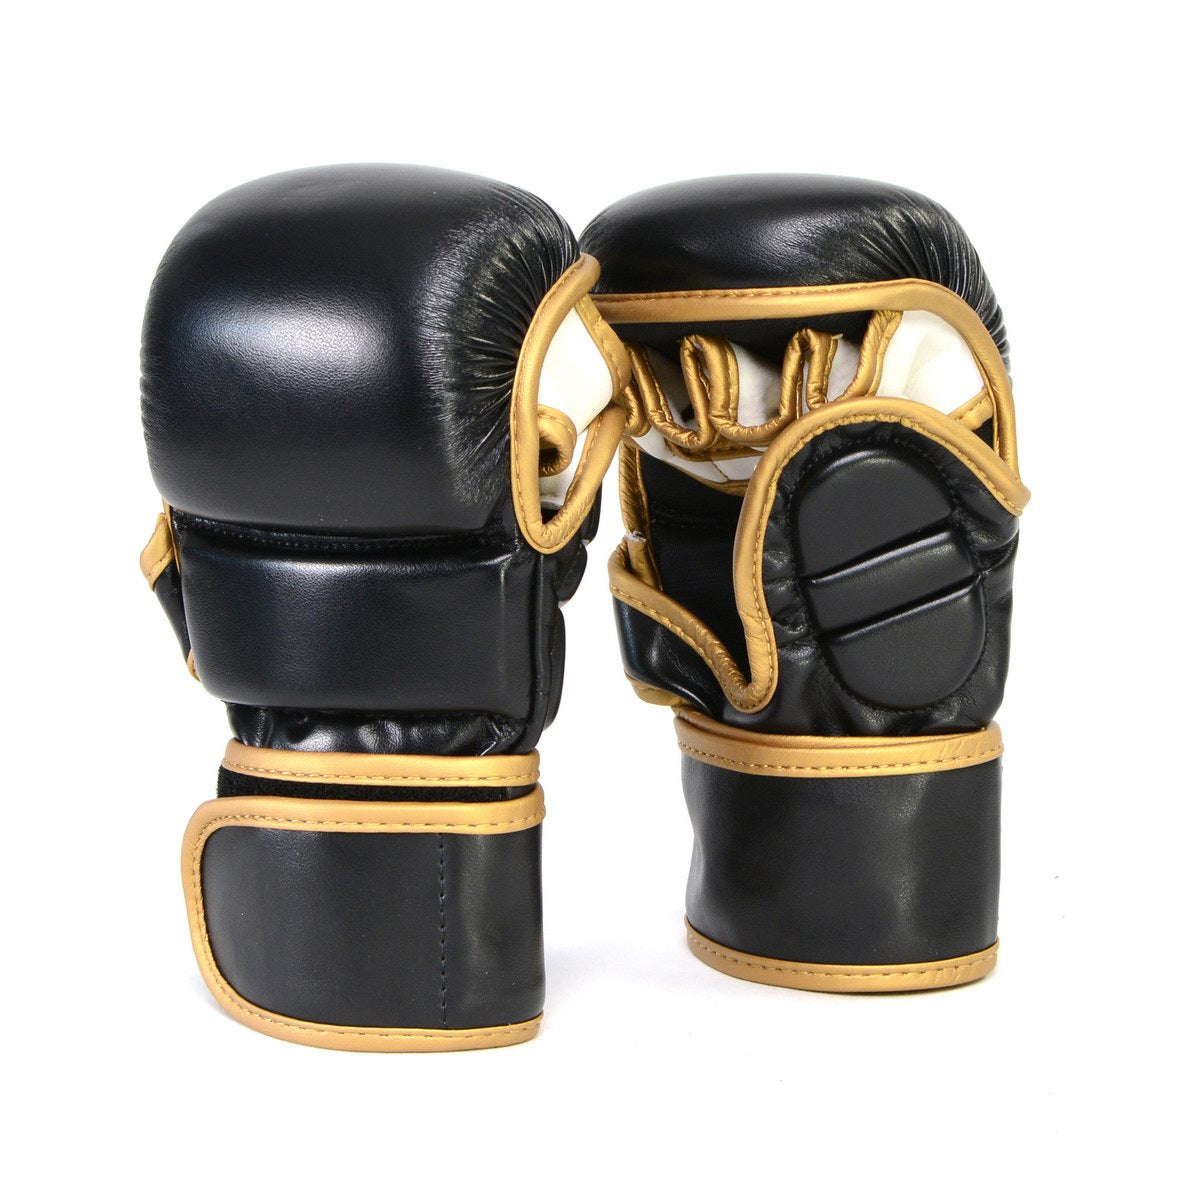 X-Fitness XF2001 7 oz Gloves-BLK/COPPER Hybrid Sparring – MMA